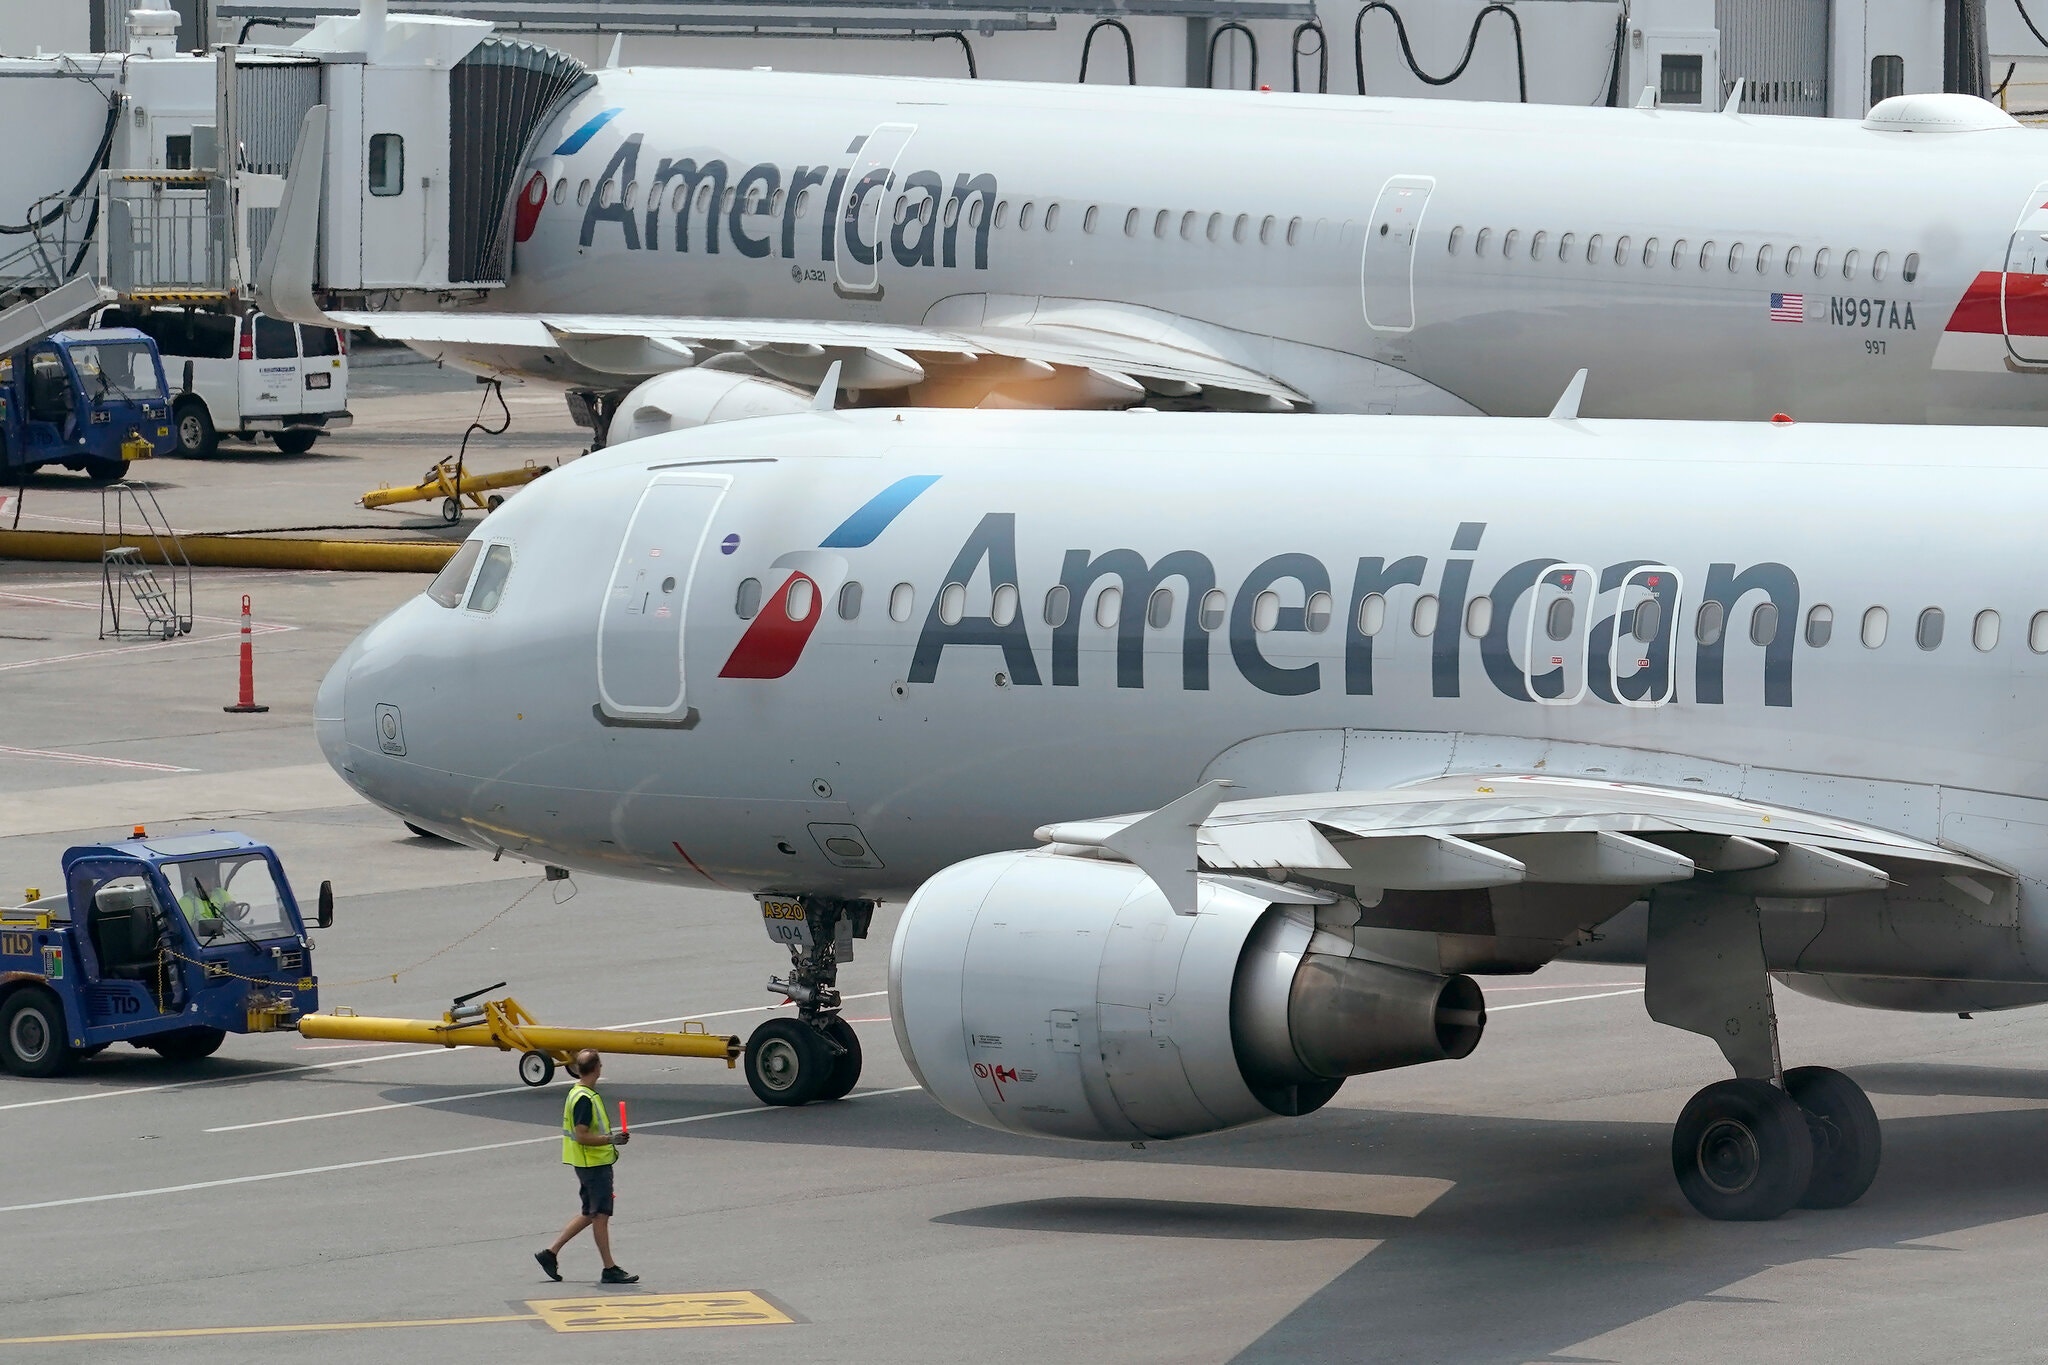 American Airlines and JetBlue Face Antitrust Suit Over Alliance